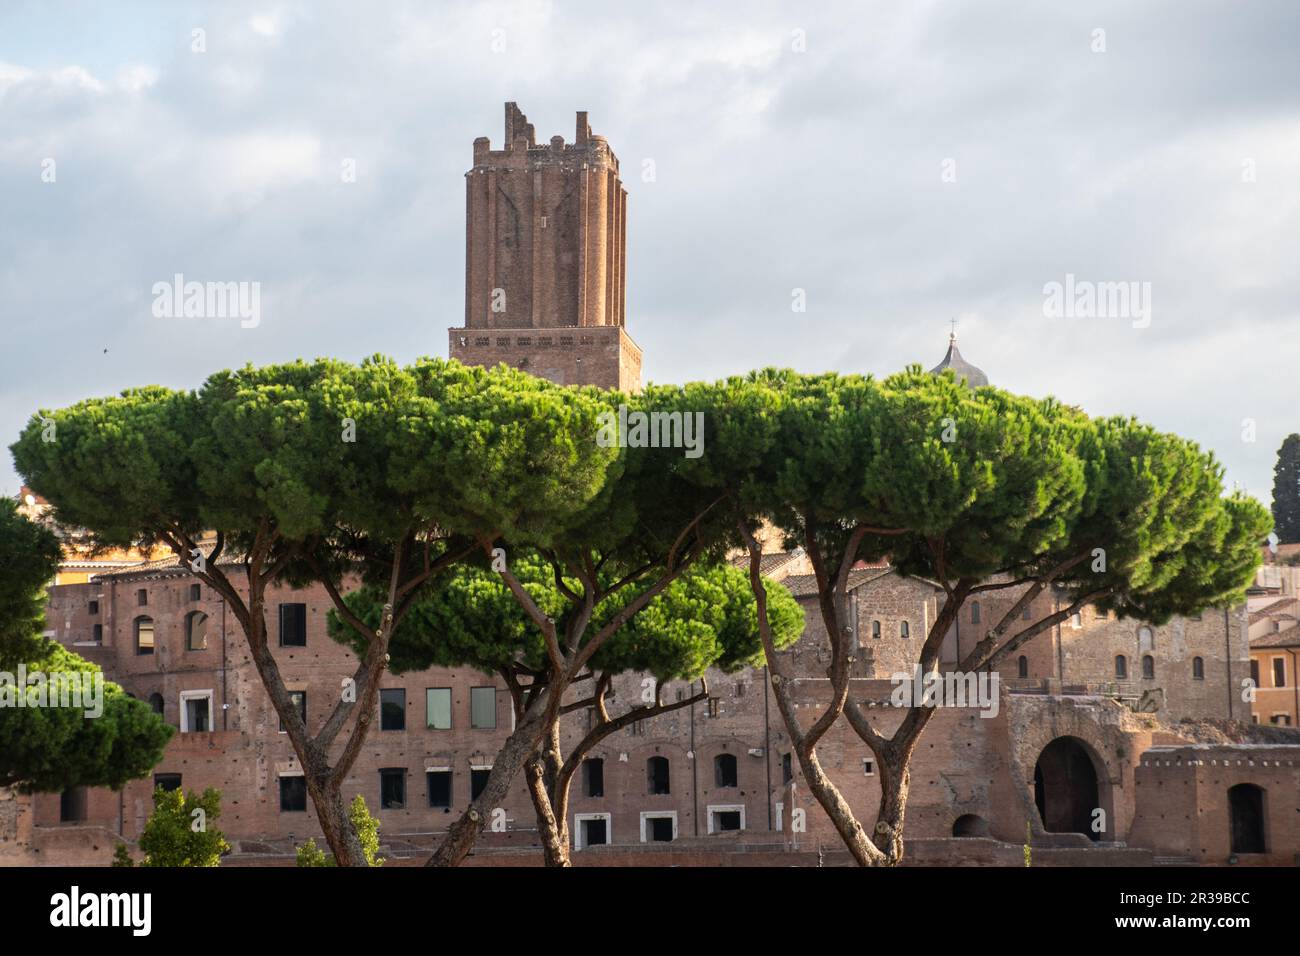 Palatine Hill Rome with Umbrella pine trees in foreground Stock Photo